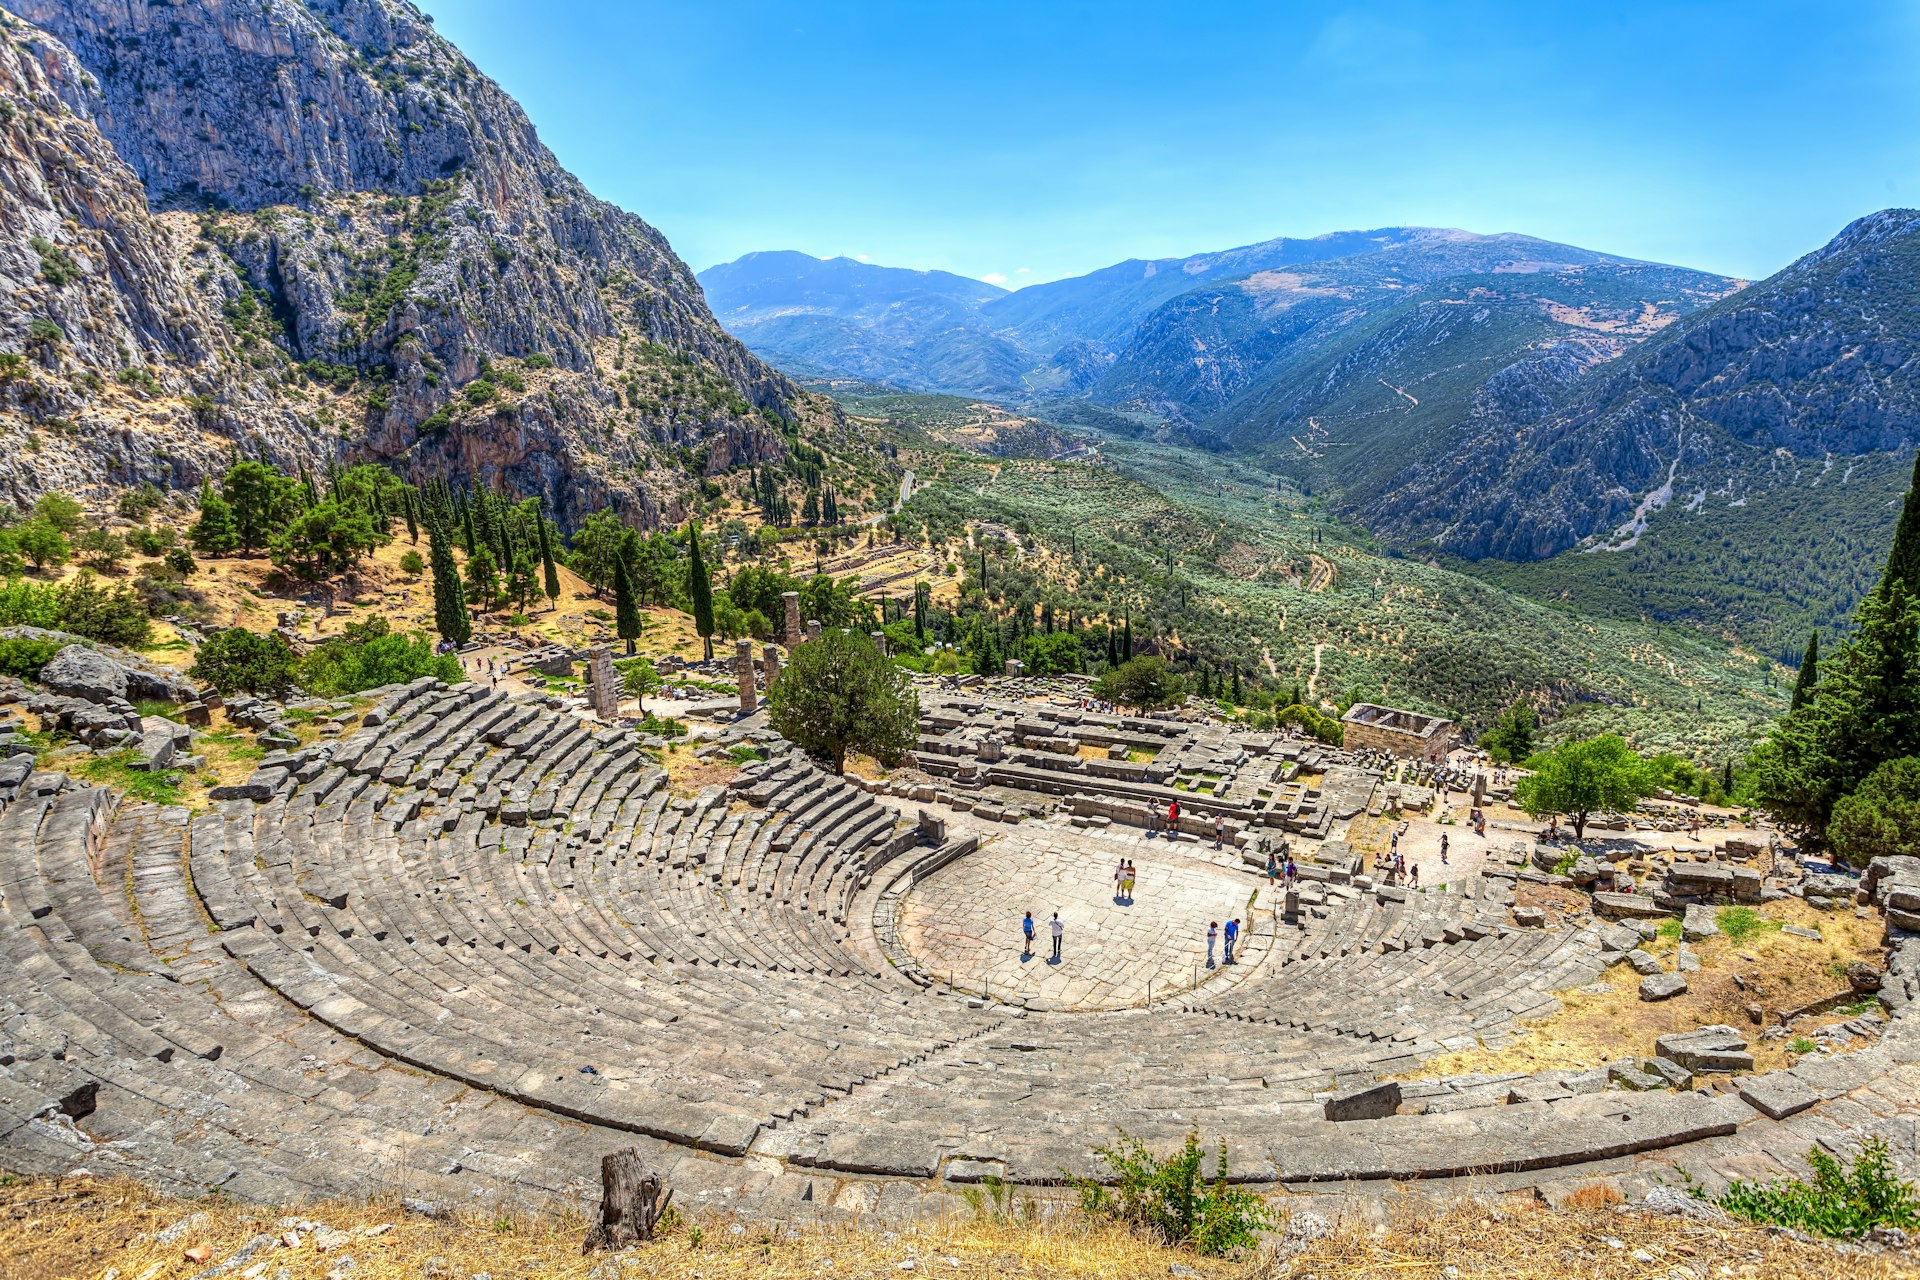 An ancient amphitheatre in Delphi, Greece. A few tourists stand in the large circular stone monument, while in the background vast green forests are visible.